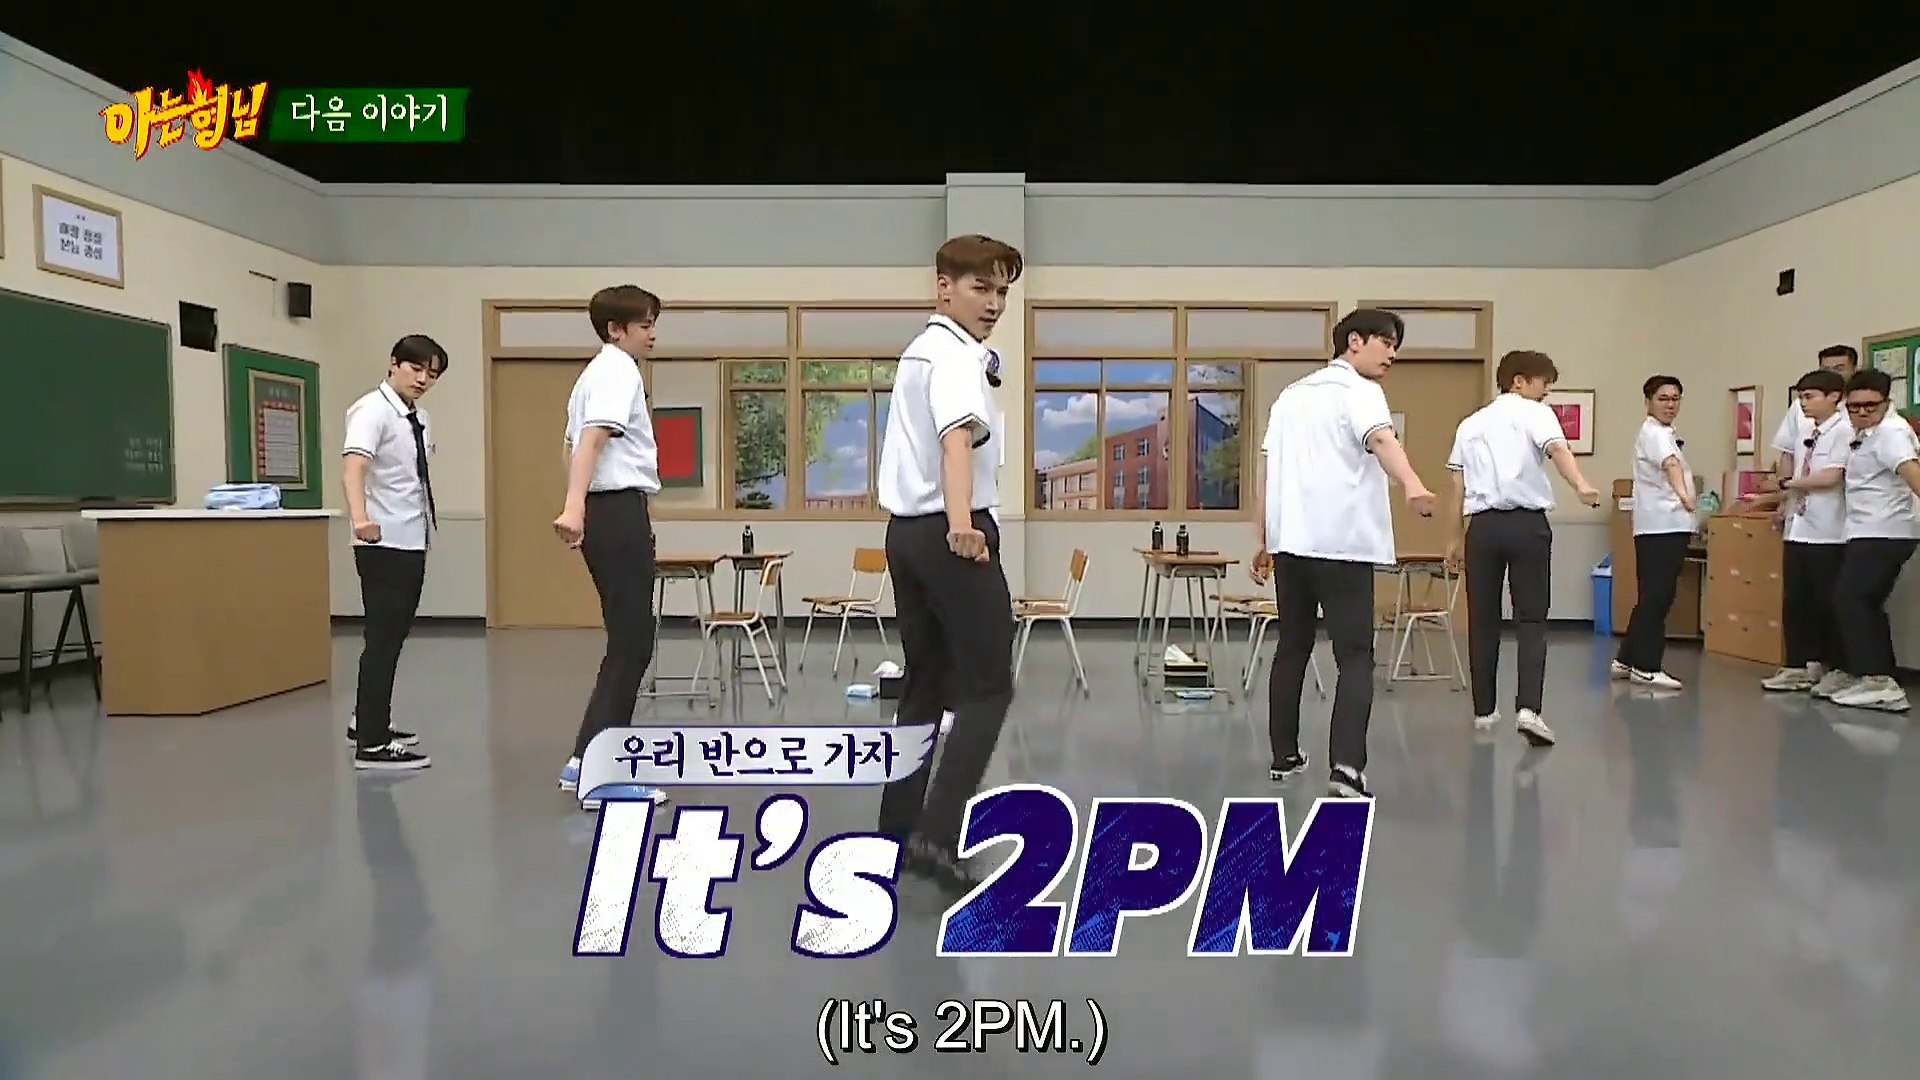 2pm knowing brother